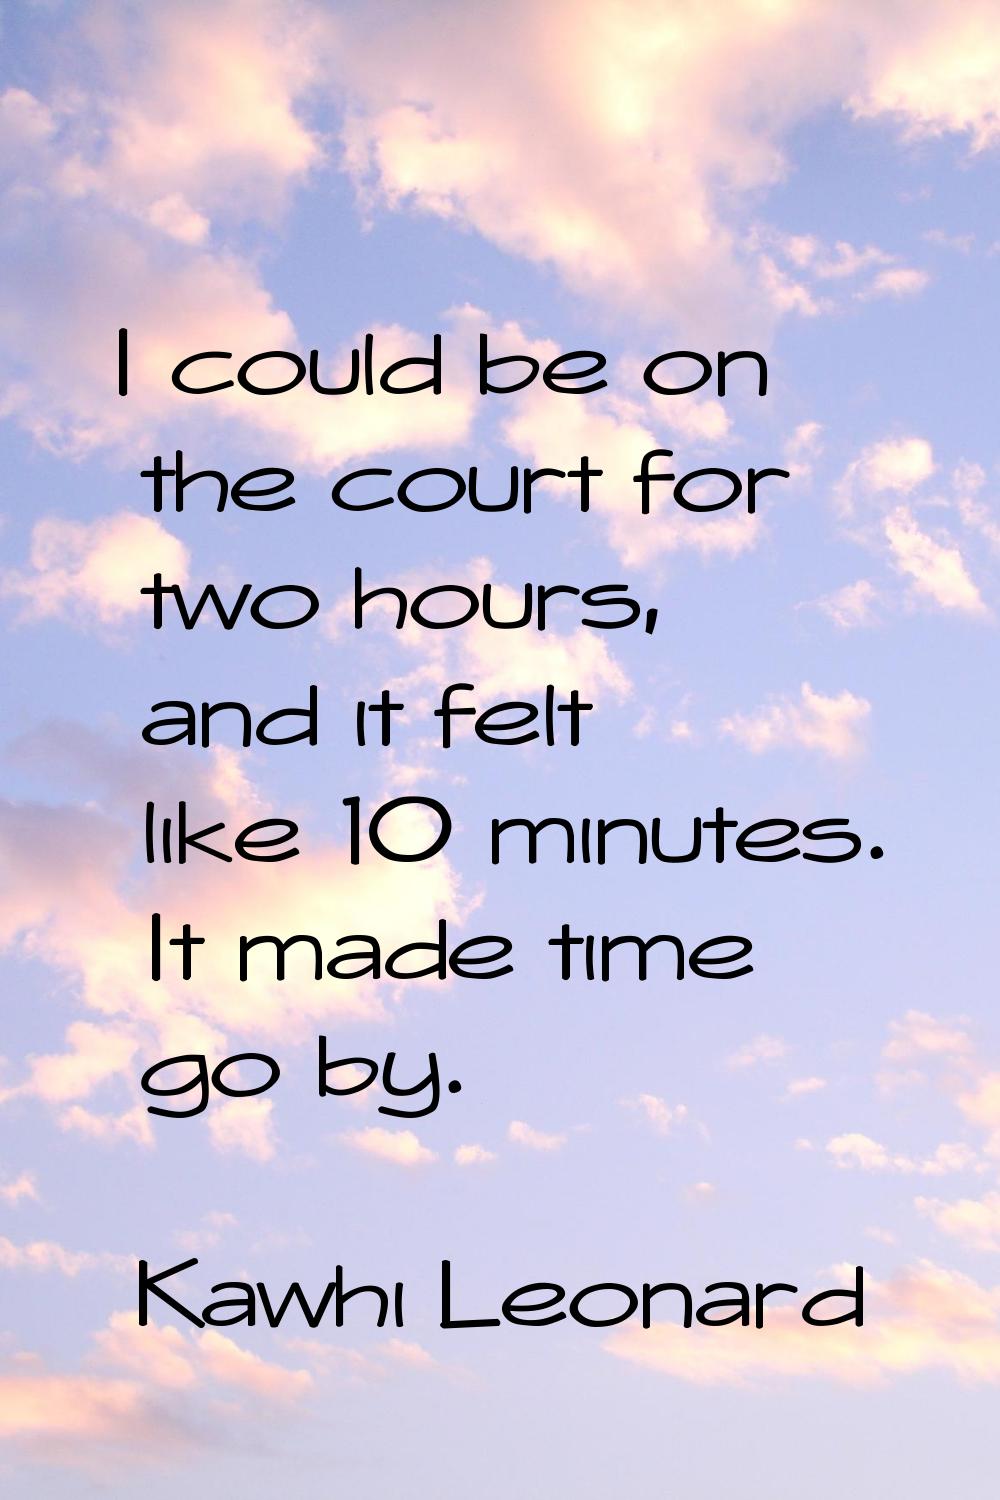 I could be on the court for two hours, and it felt like 10 minutes. It made time go by.